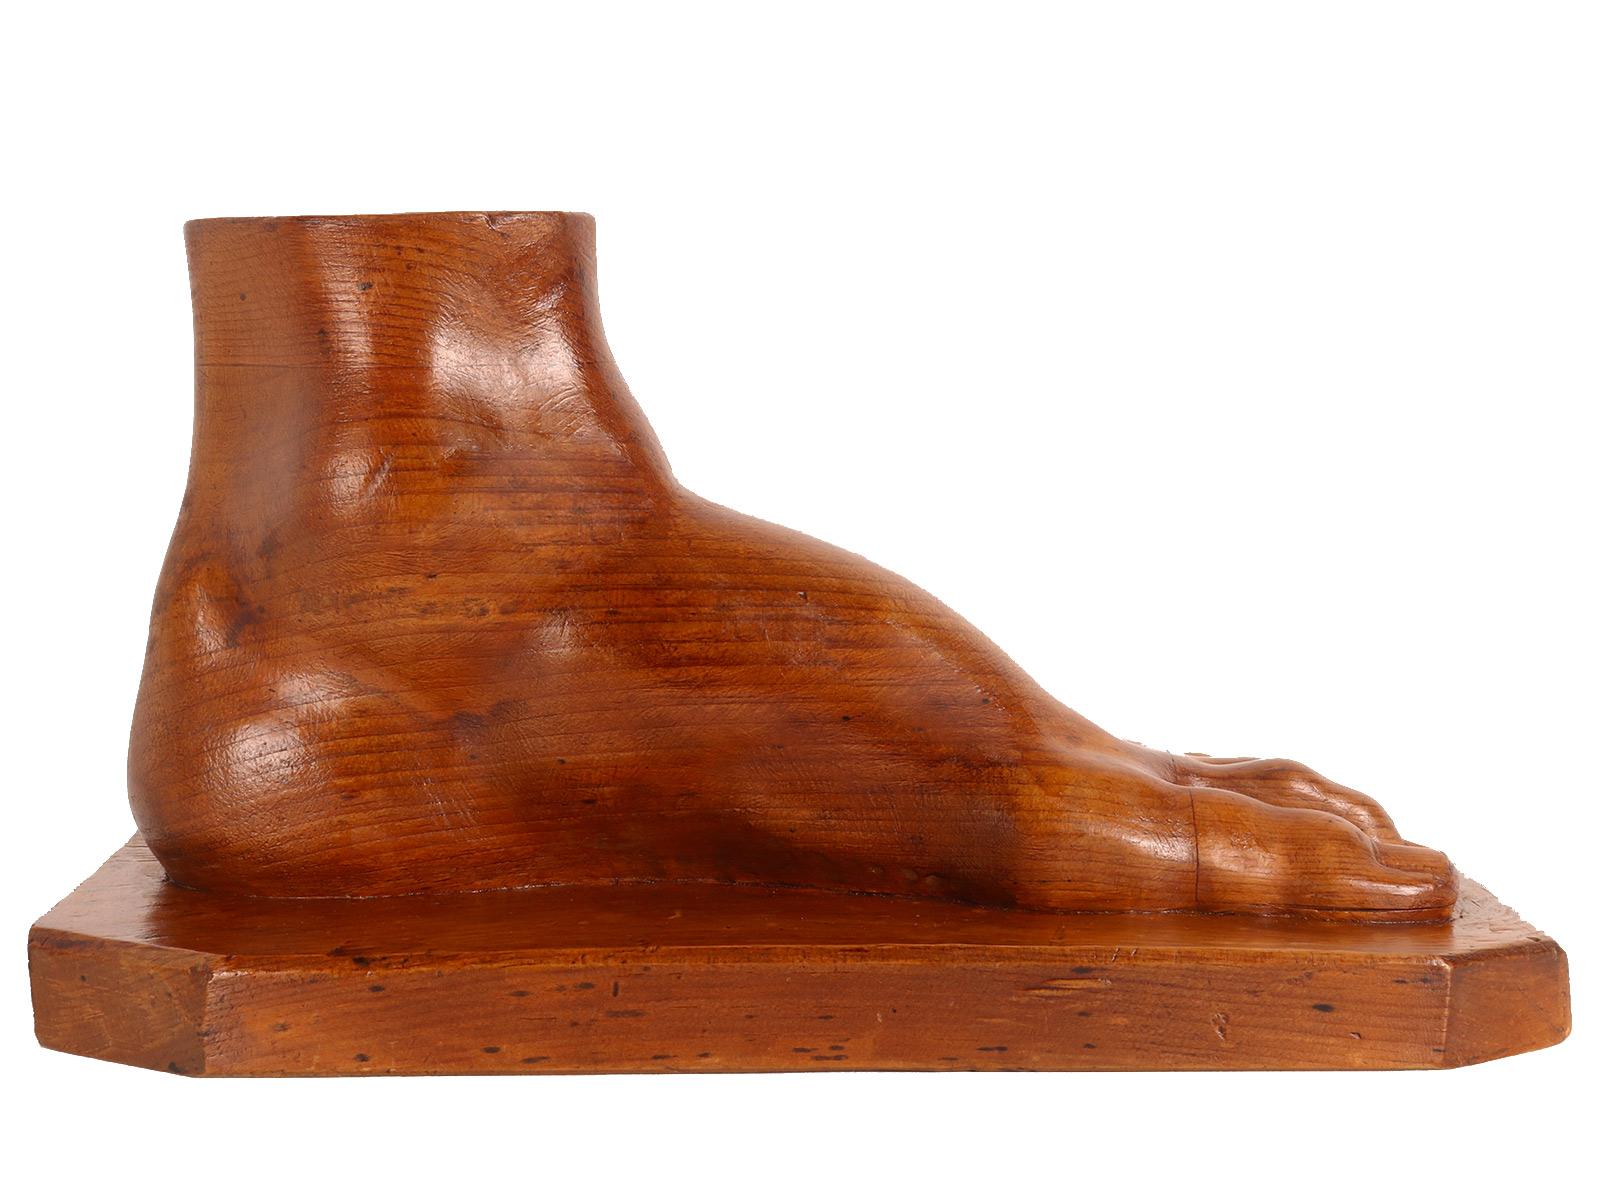 Wood Artistic Atelier Sculpture Depicting a Foot, Germany, 1902  For Sale